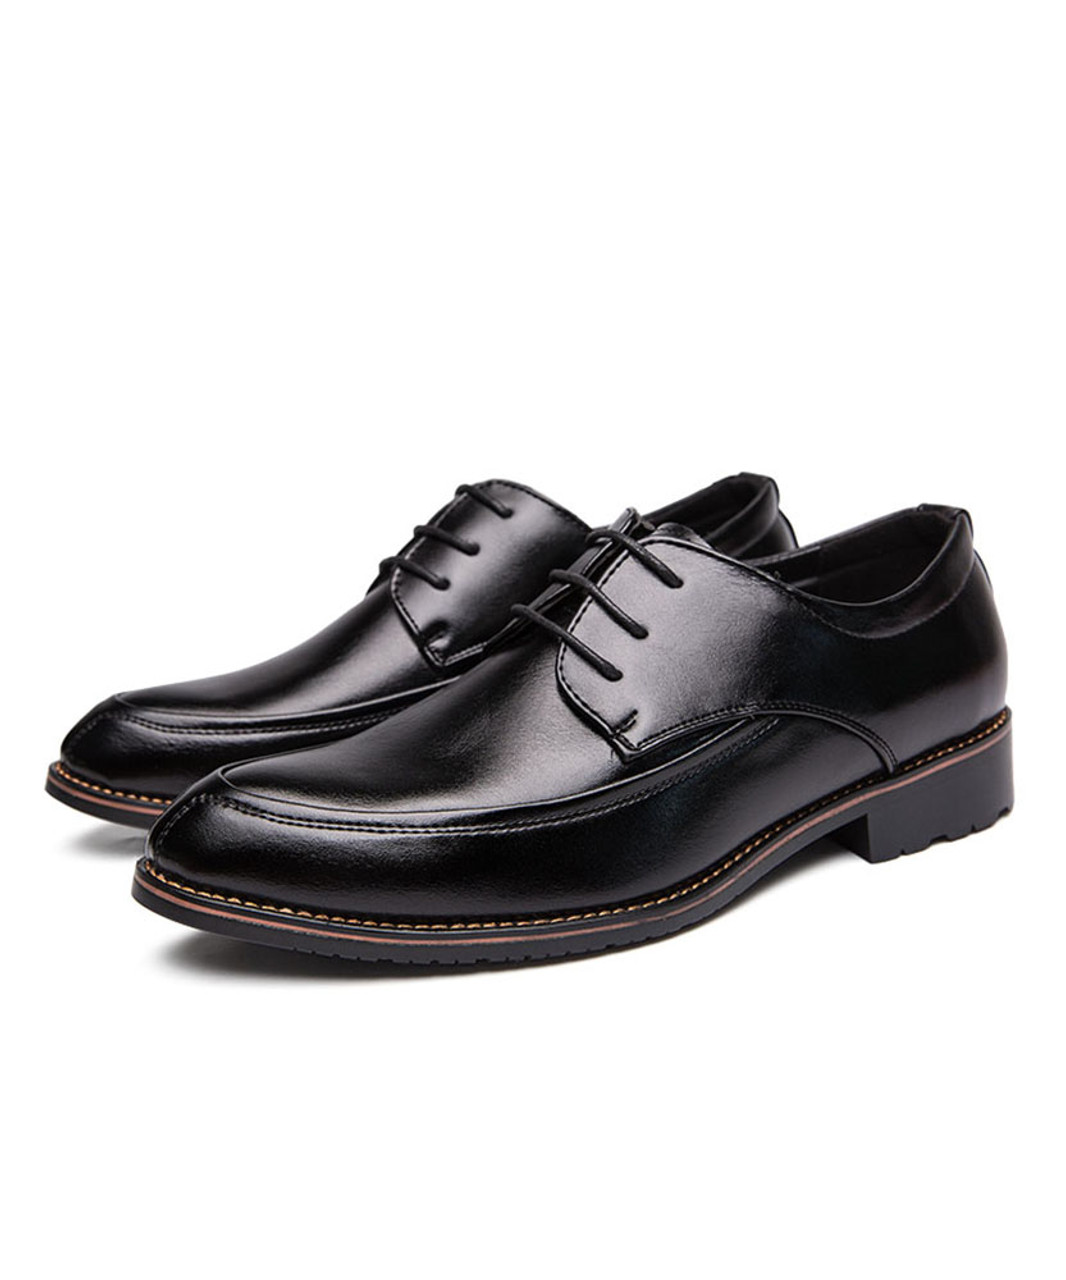 Black sewed style leather derby dress shoe | Mens dress shoes online 1960MS